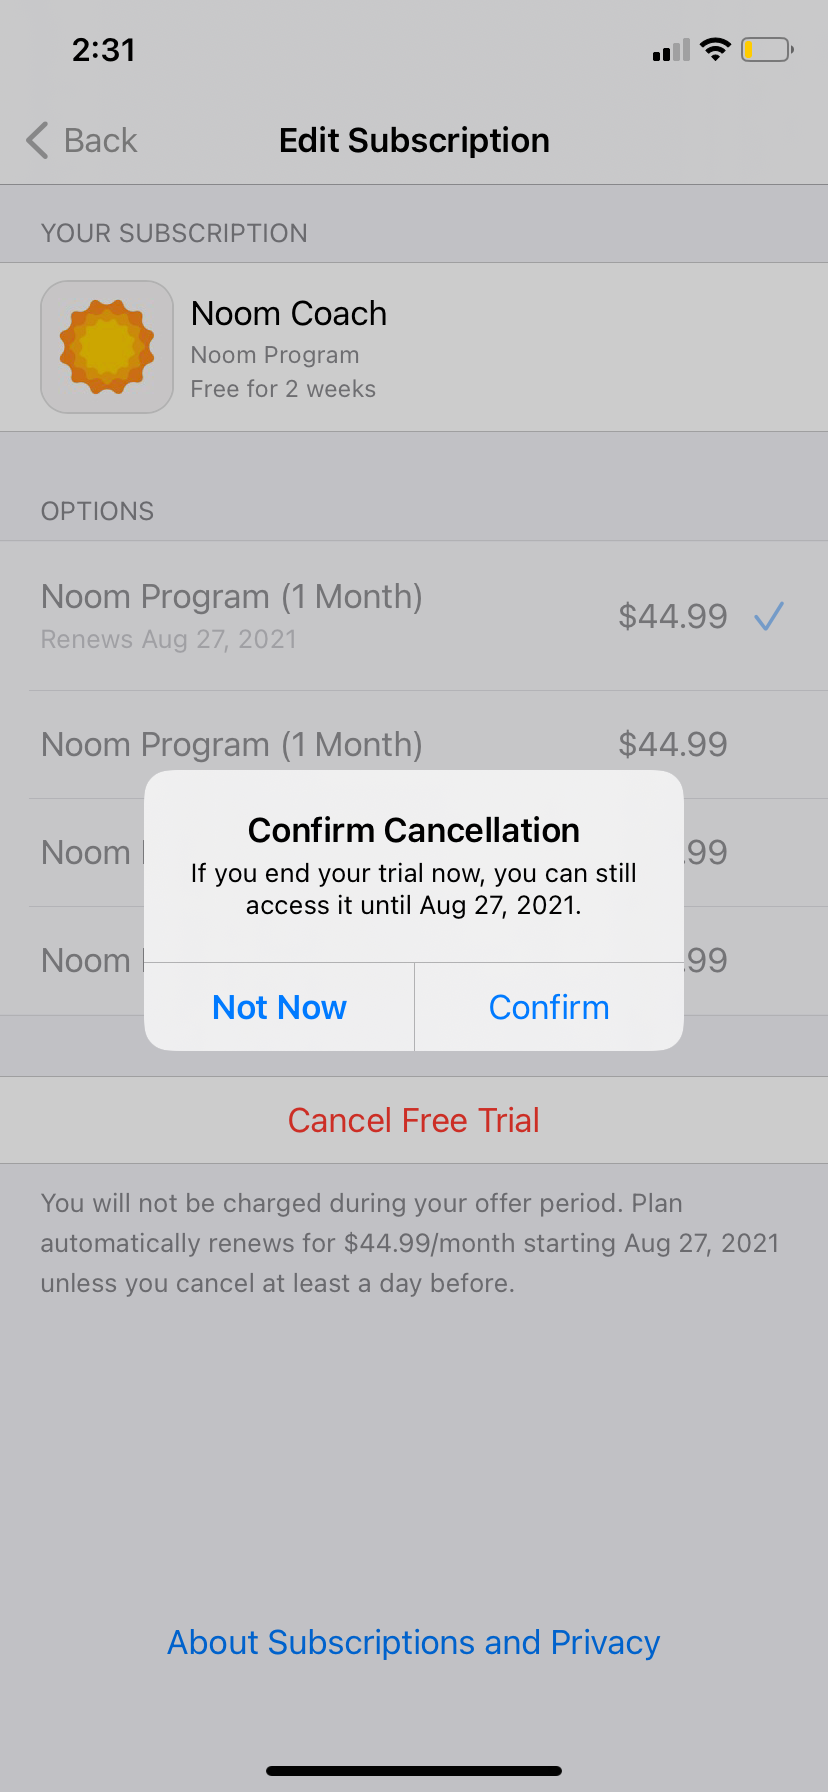 Confirming Noom subscription cancellation in iPhone settings